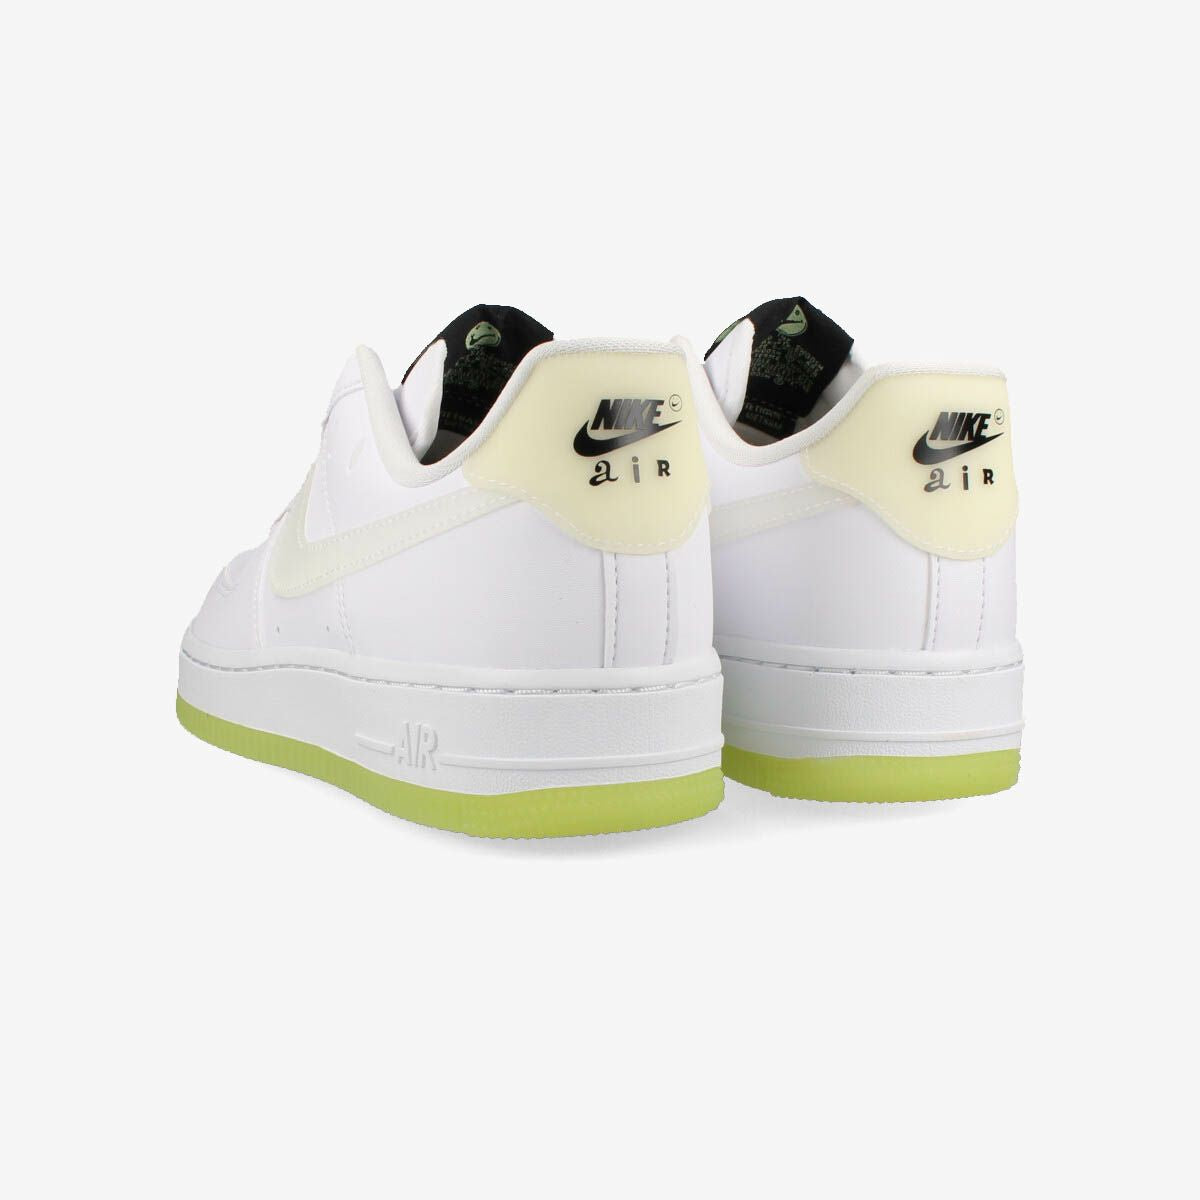 NIKE WMNS AIR FORCE 1 '07 LX [GLOW IN THE DARK] WHITE/BARELY VOLT/BLAC